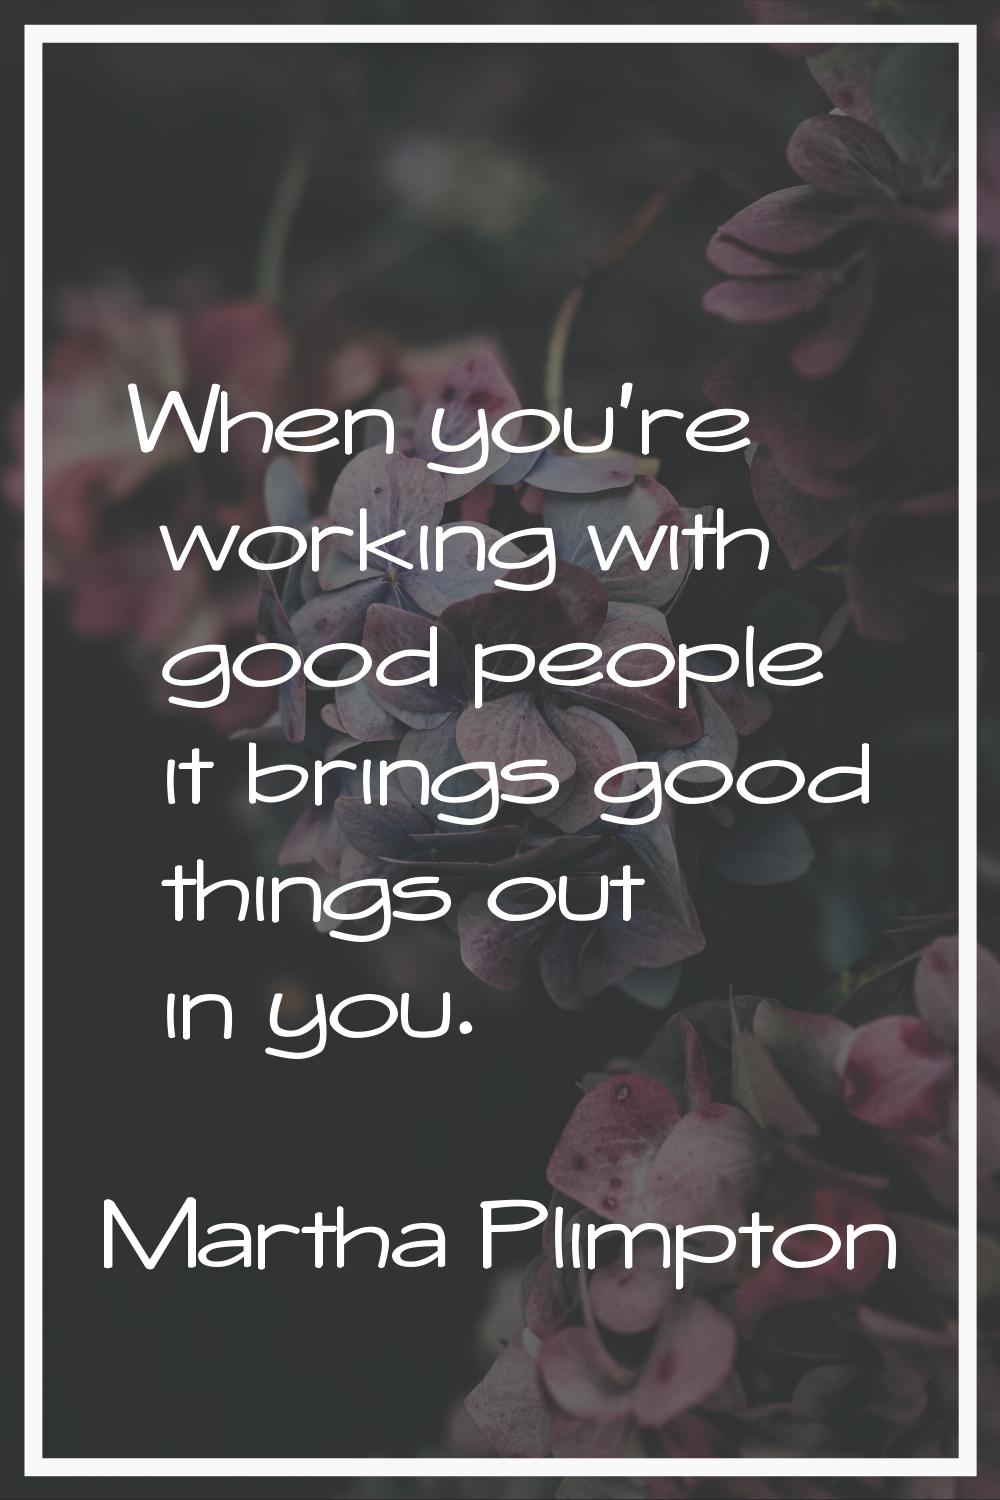 When you're working with good people it brings good things out in you.